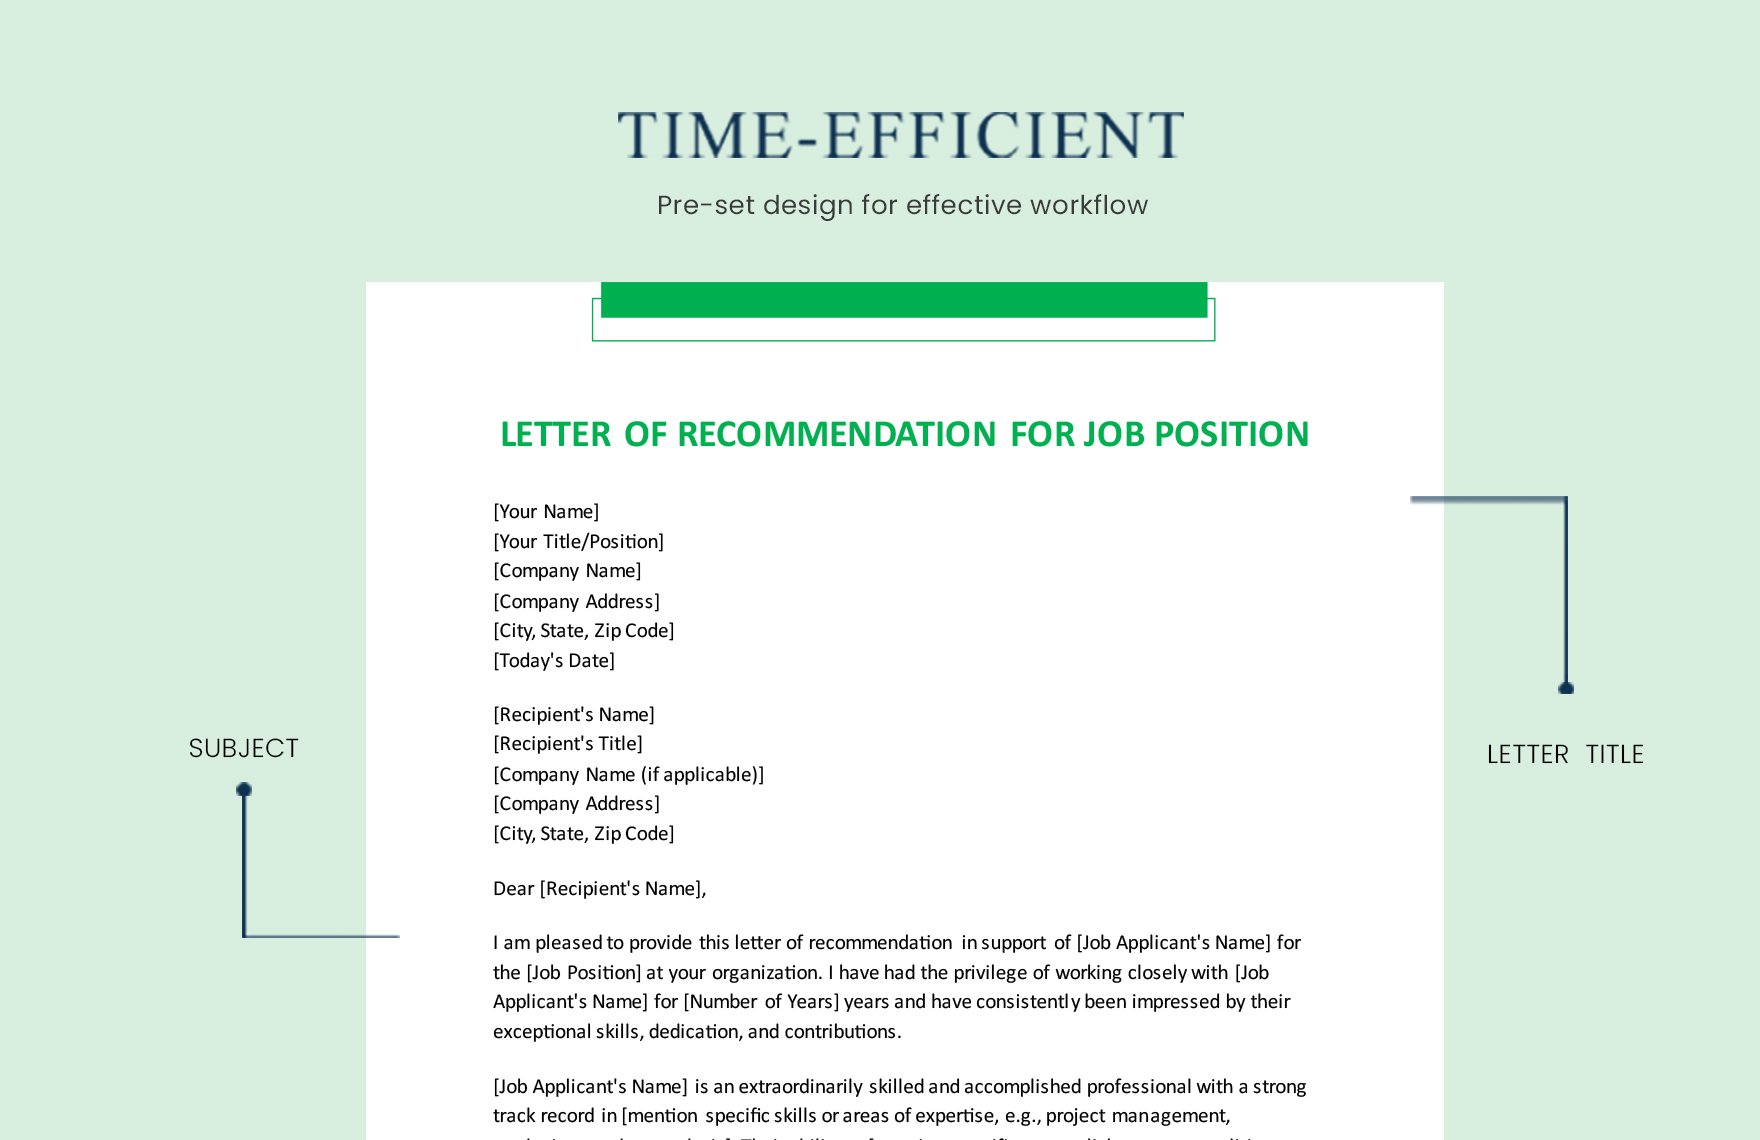 Letter Of Recommendation For Job Position